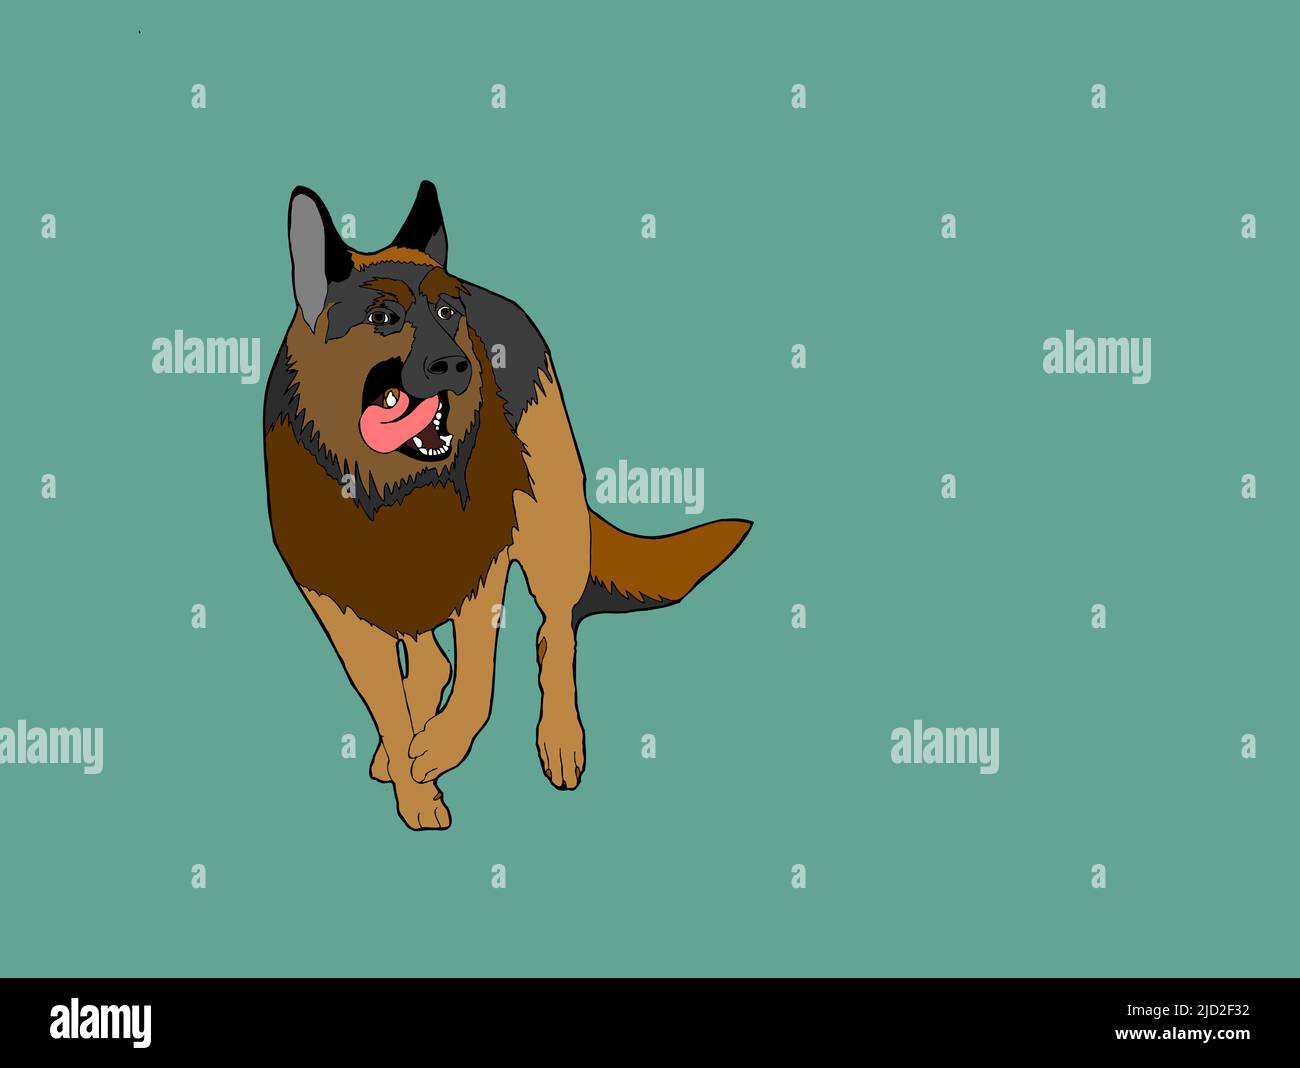 Flat isolated sheppard. Dog breed illustration vector Stock Vector ...